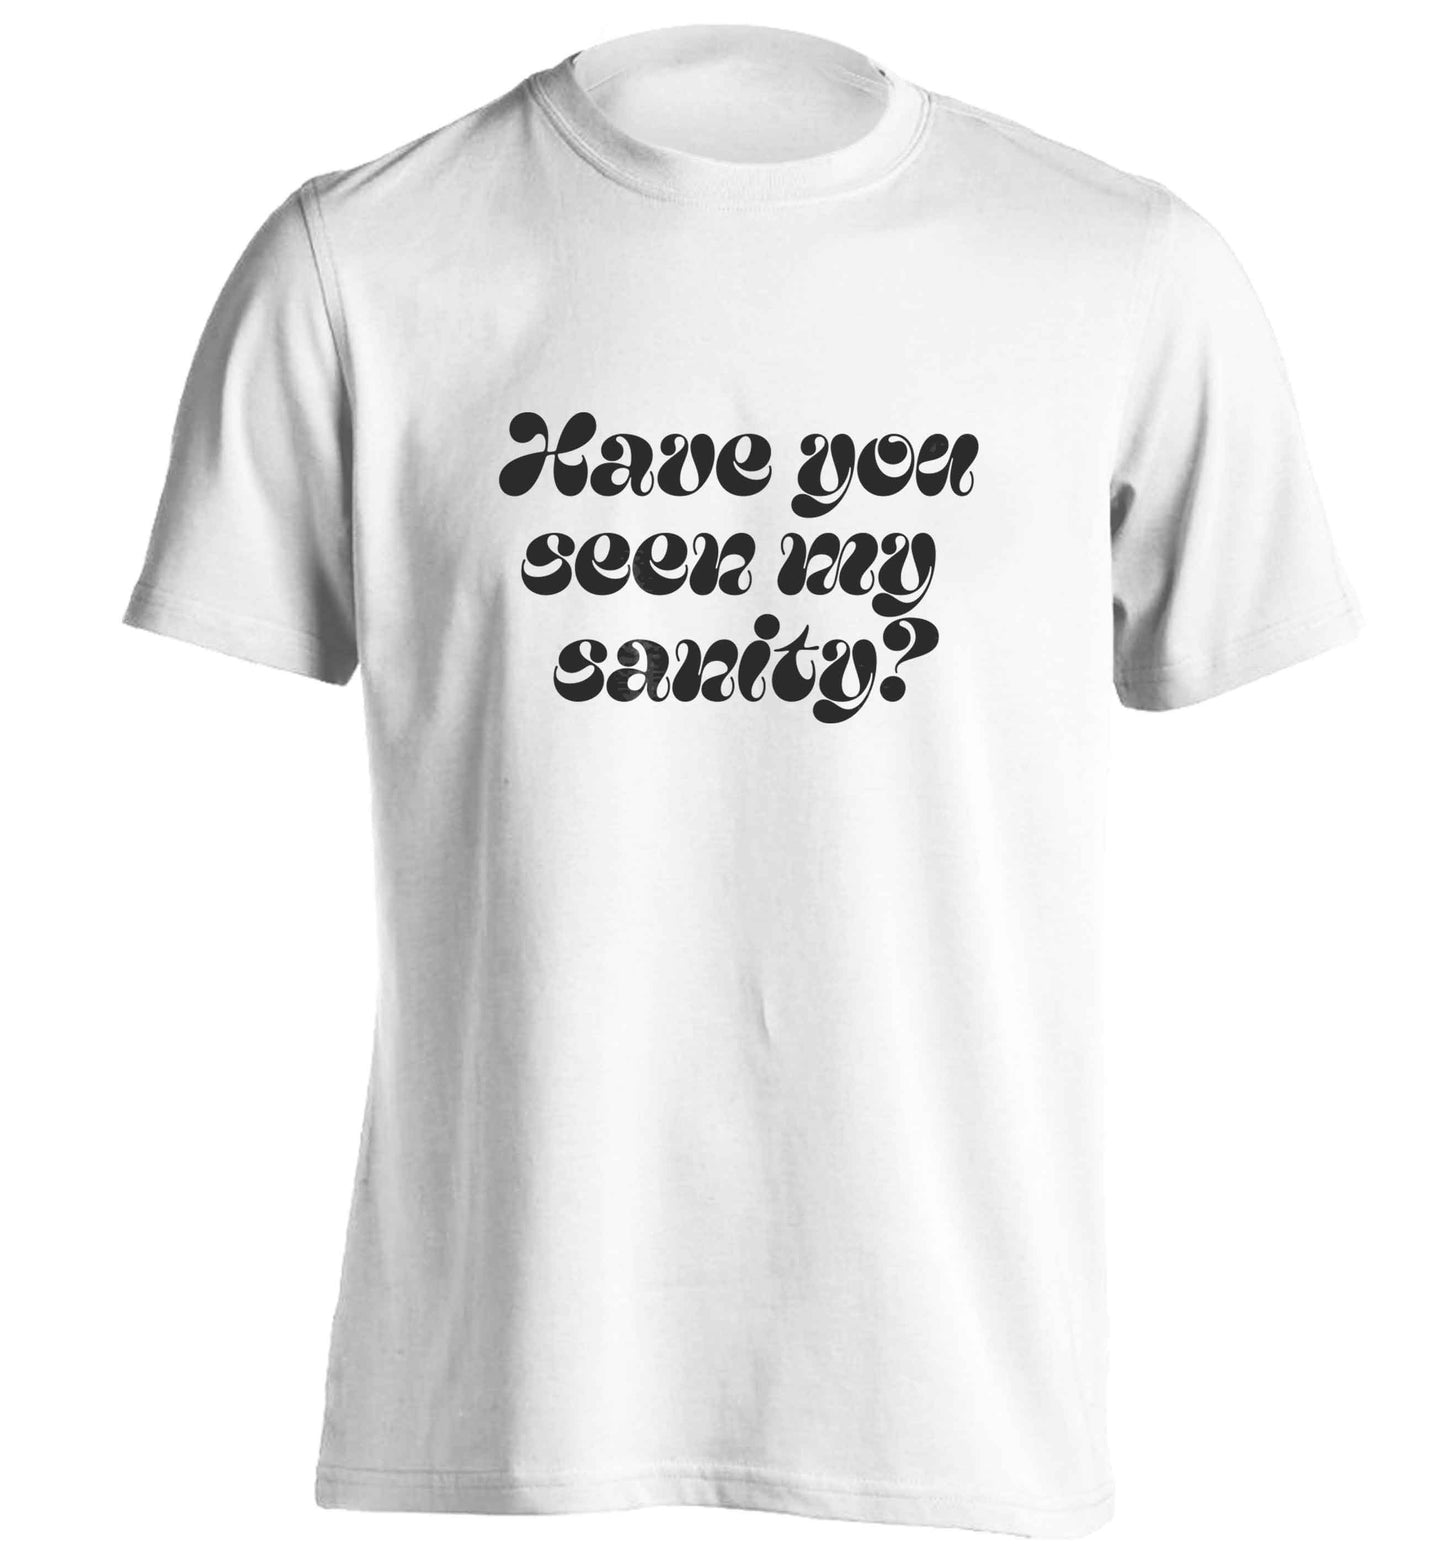 Have you seen my sanity? adults unisex white Tshirt 2XL